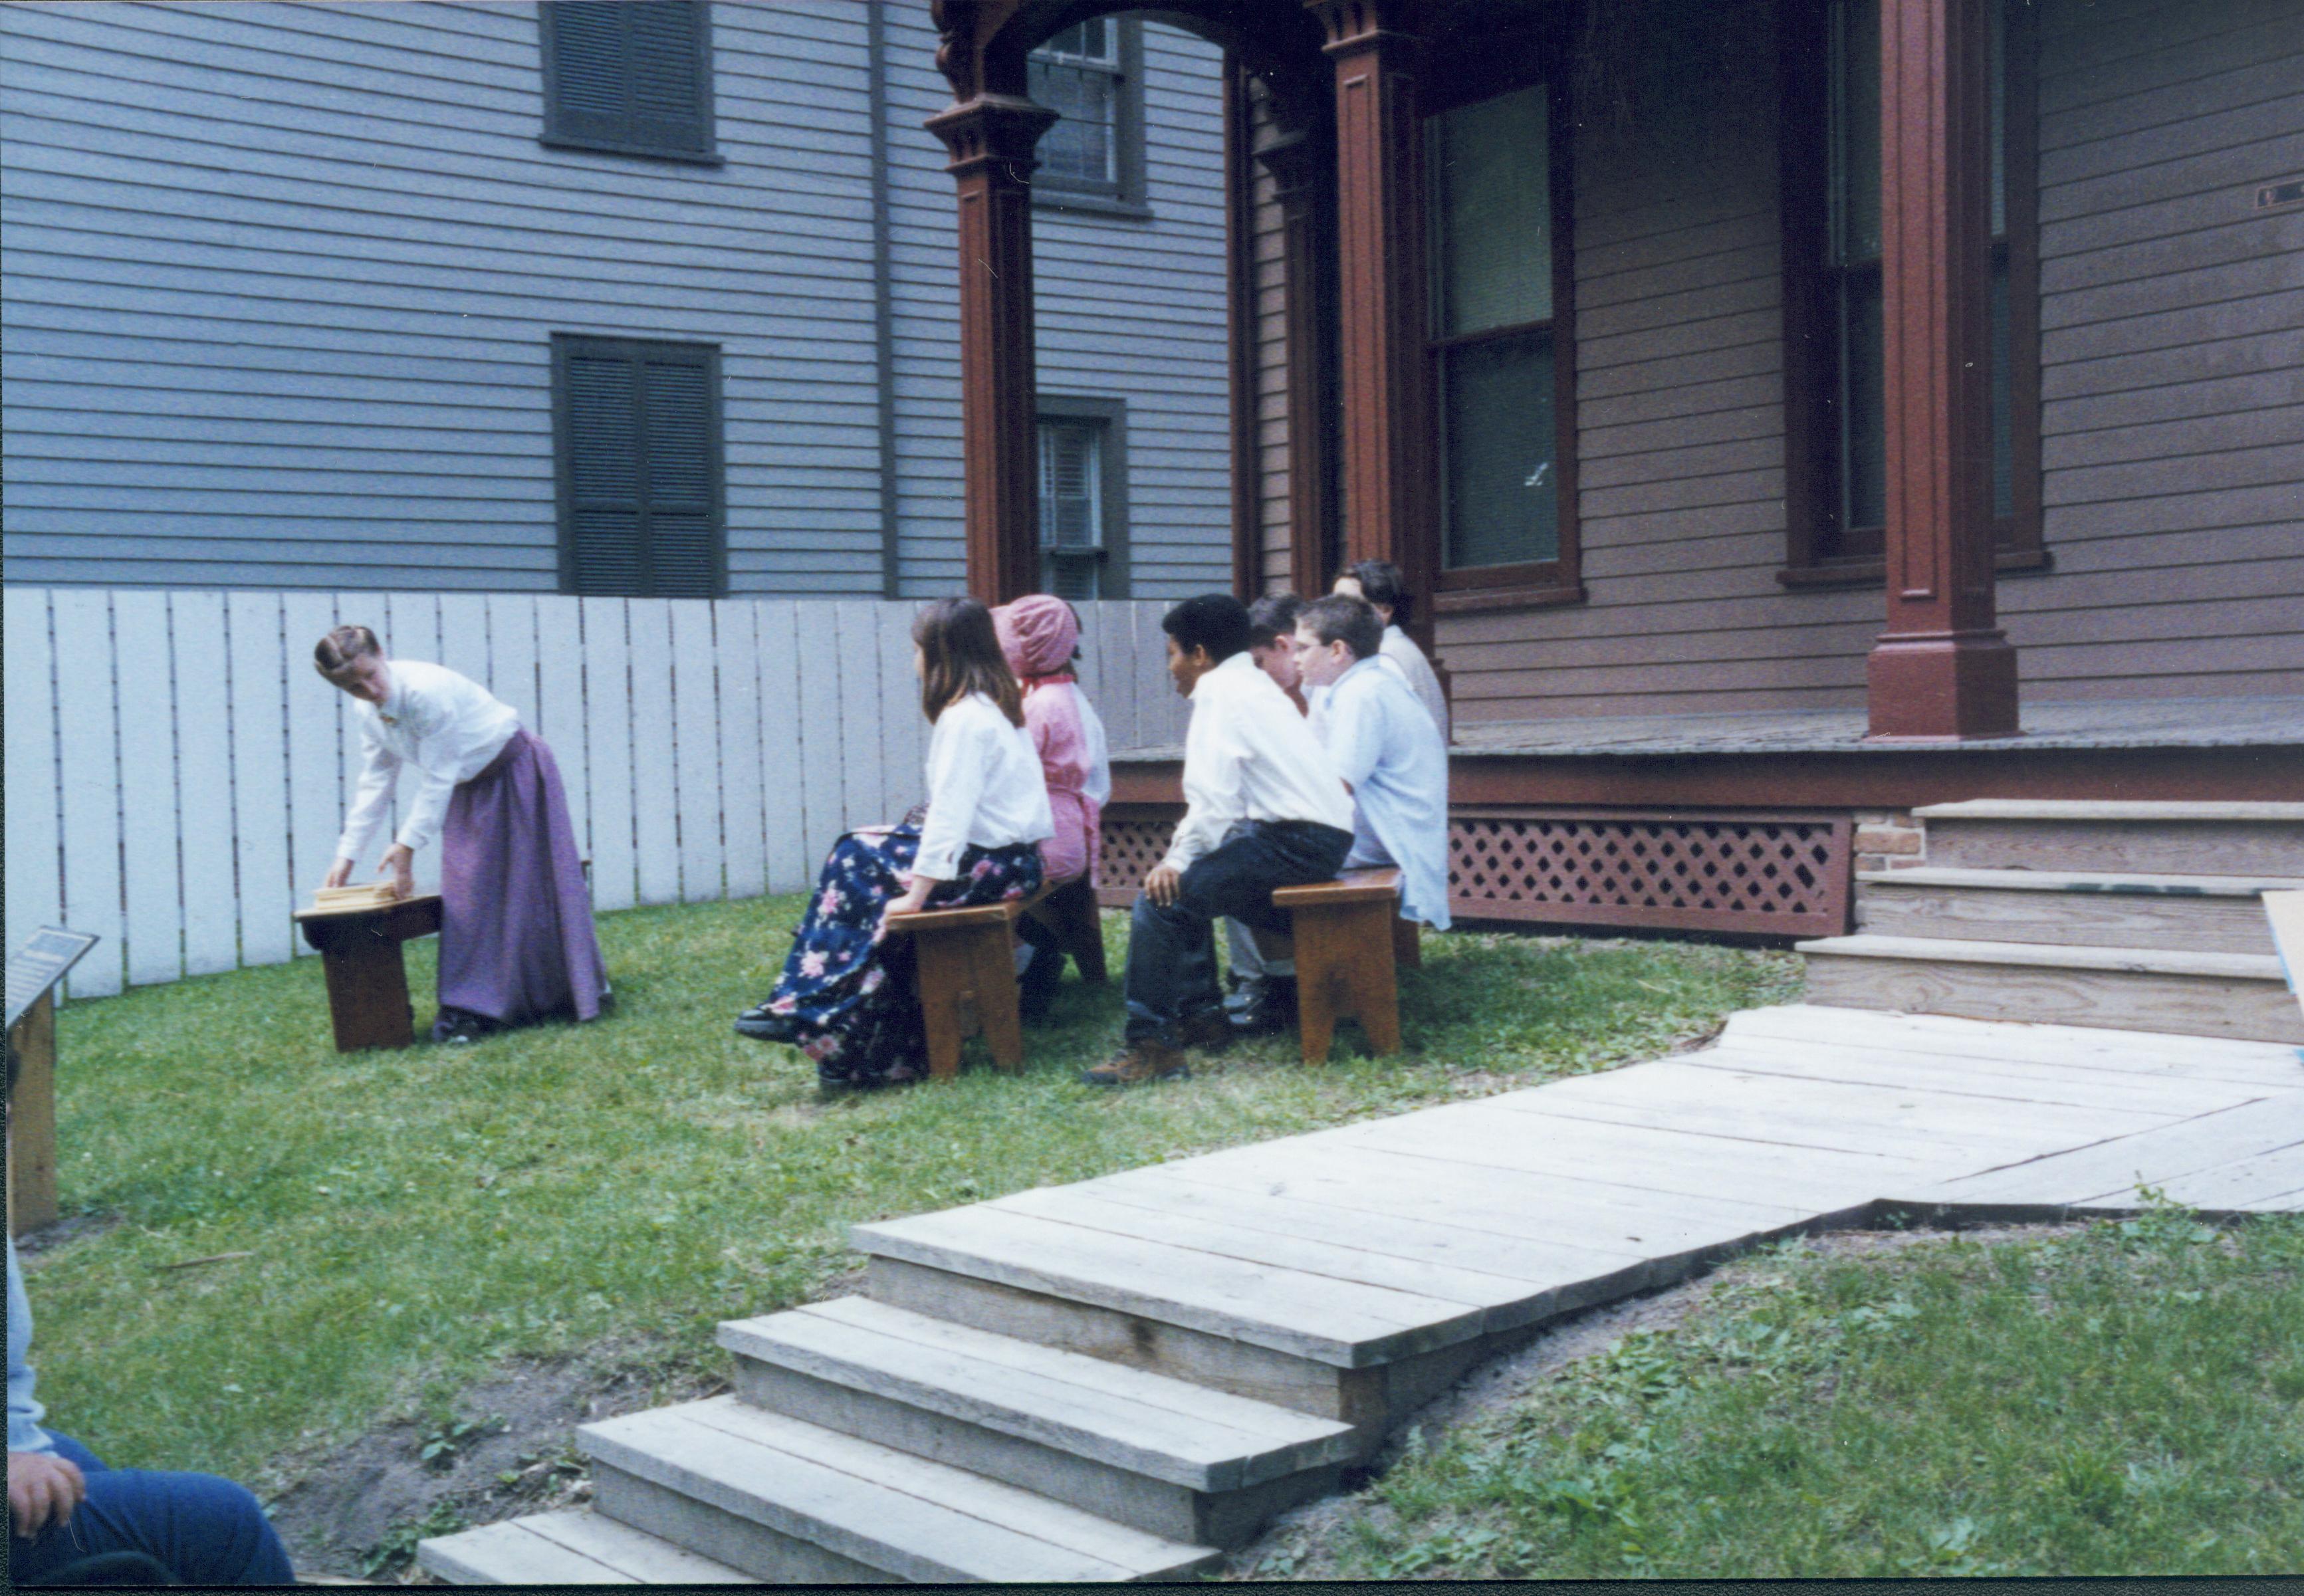 Iles School Living History program - Students performing skit on 19th century education on benches in Beedle House lawn. Visitor watching on left. Lyon House in background Looking Southwest from boardwalk along 8th Street Iles School, living history, education, Beedle, Lyon, students